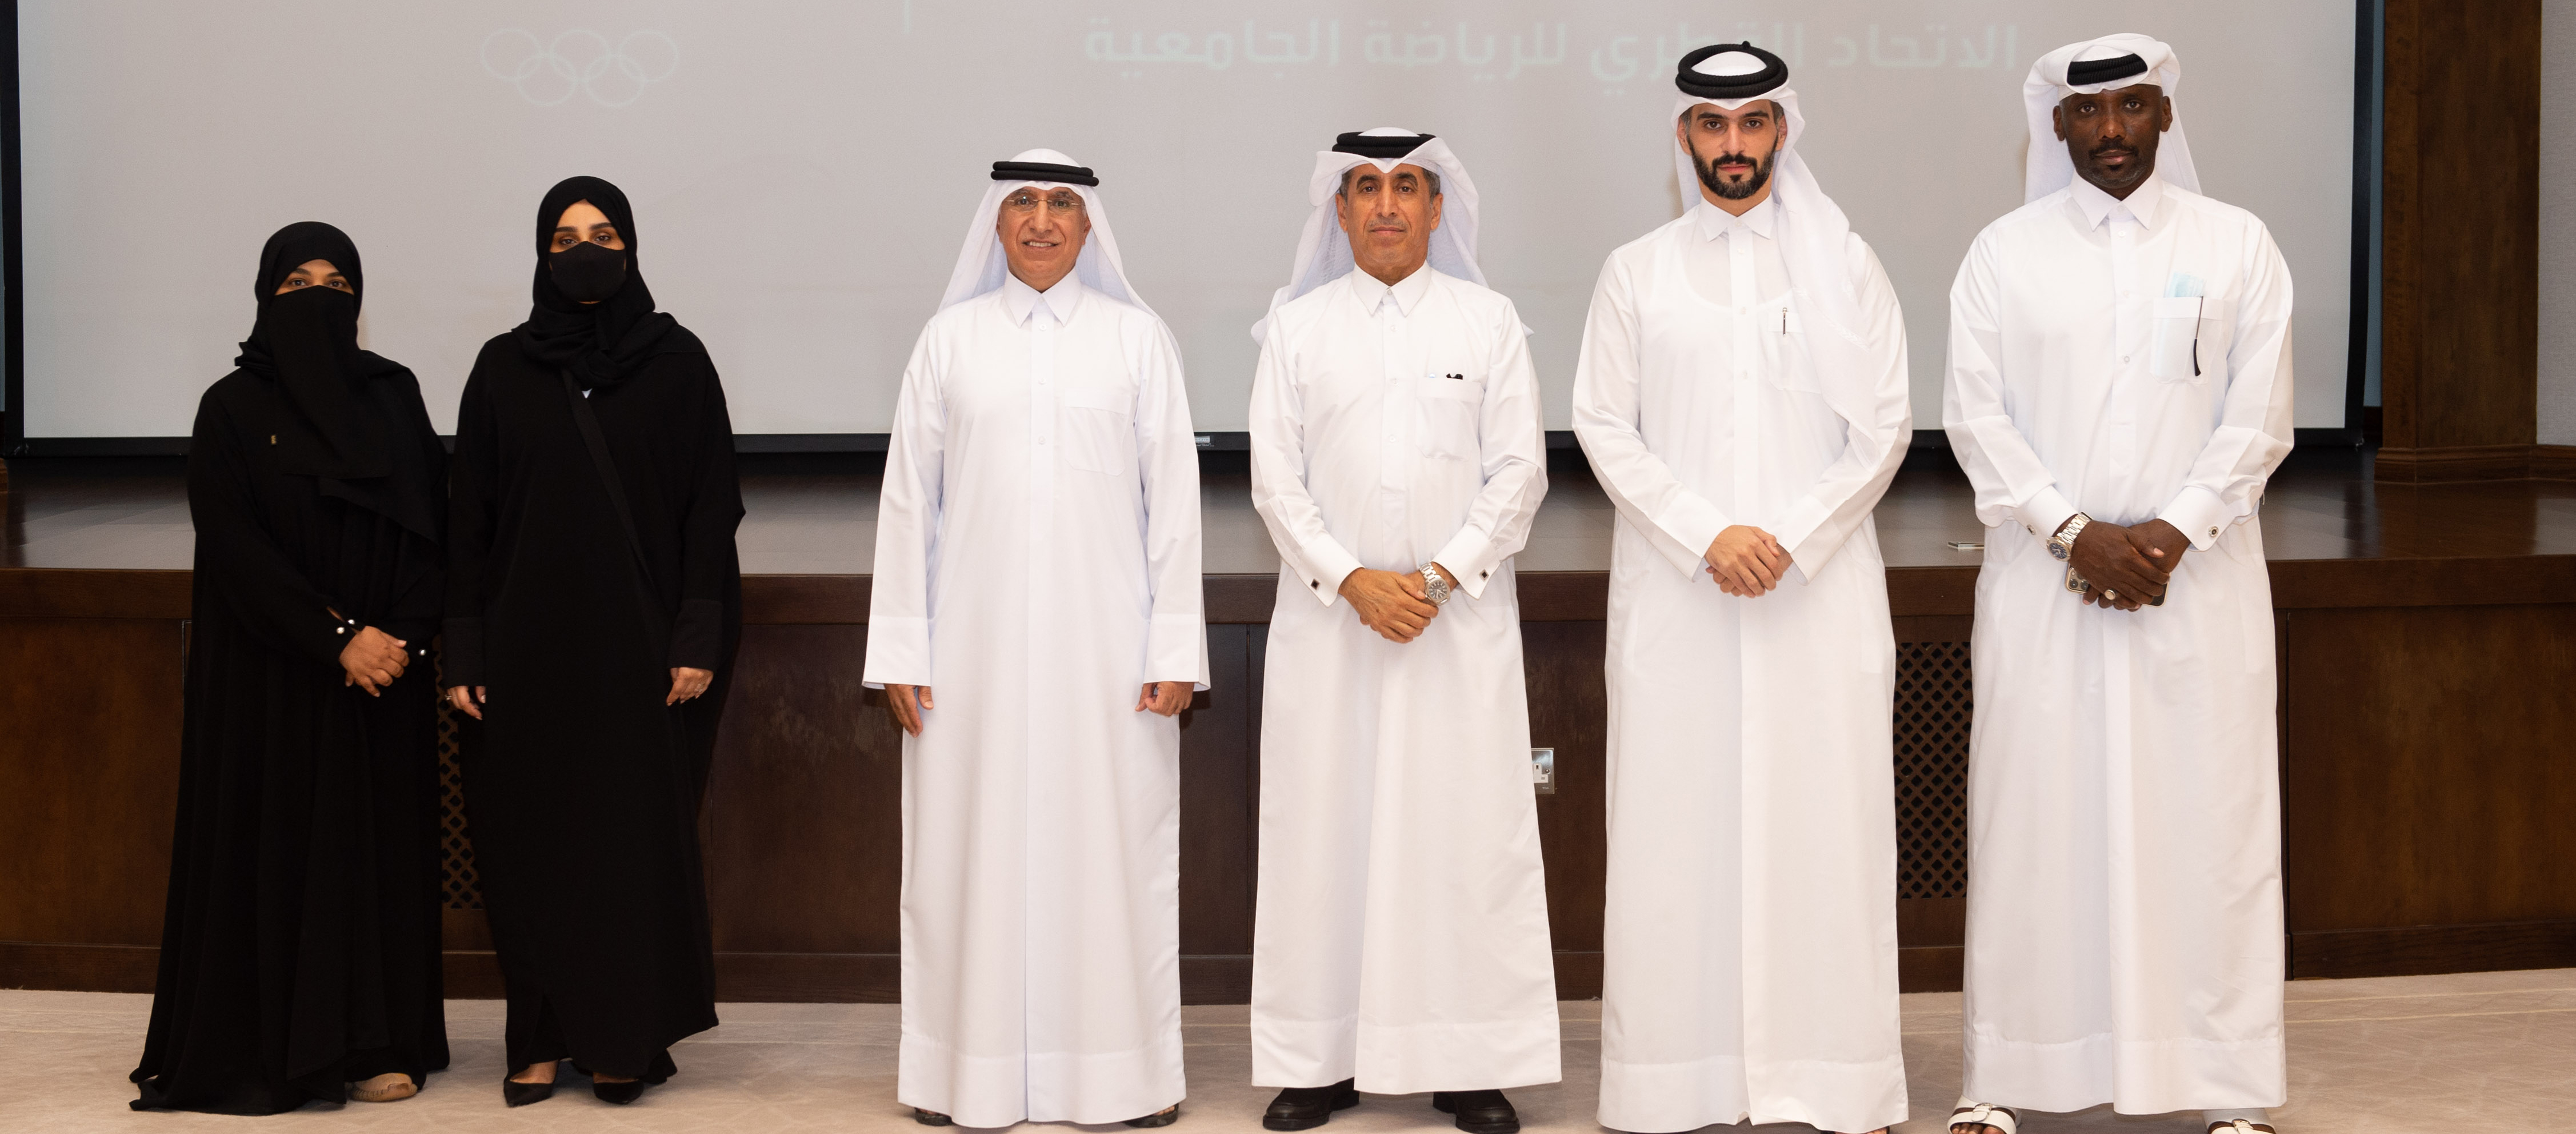 Qatar Collegiate Sports Federation Message, Vision, and Objectives Unveiled